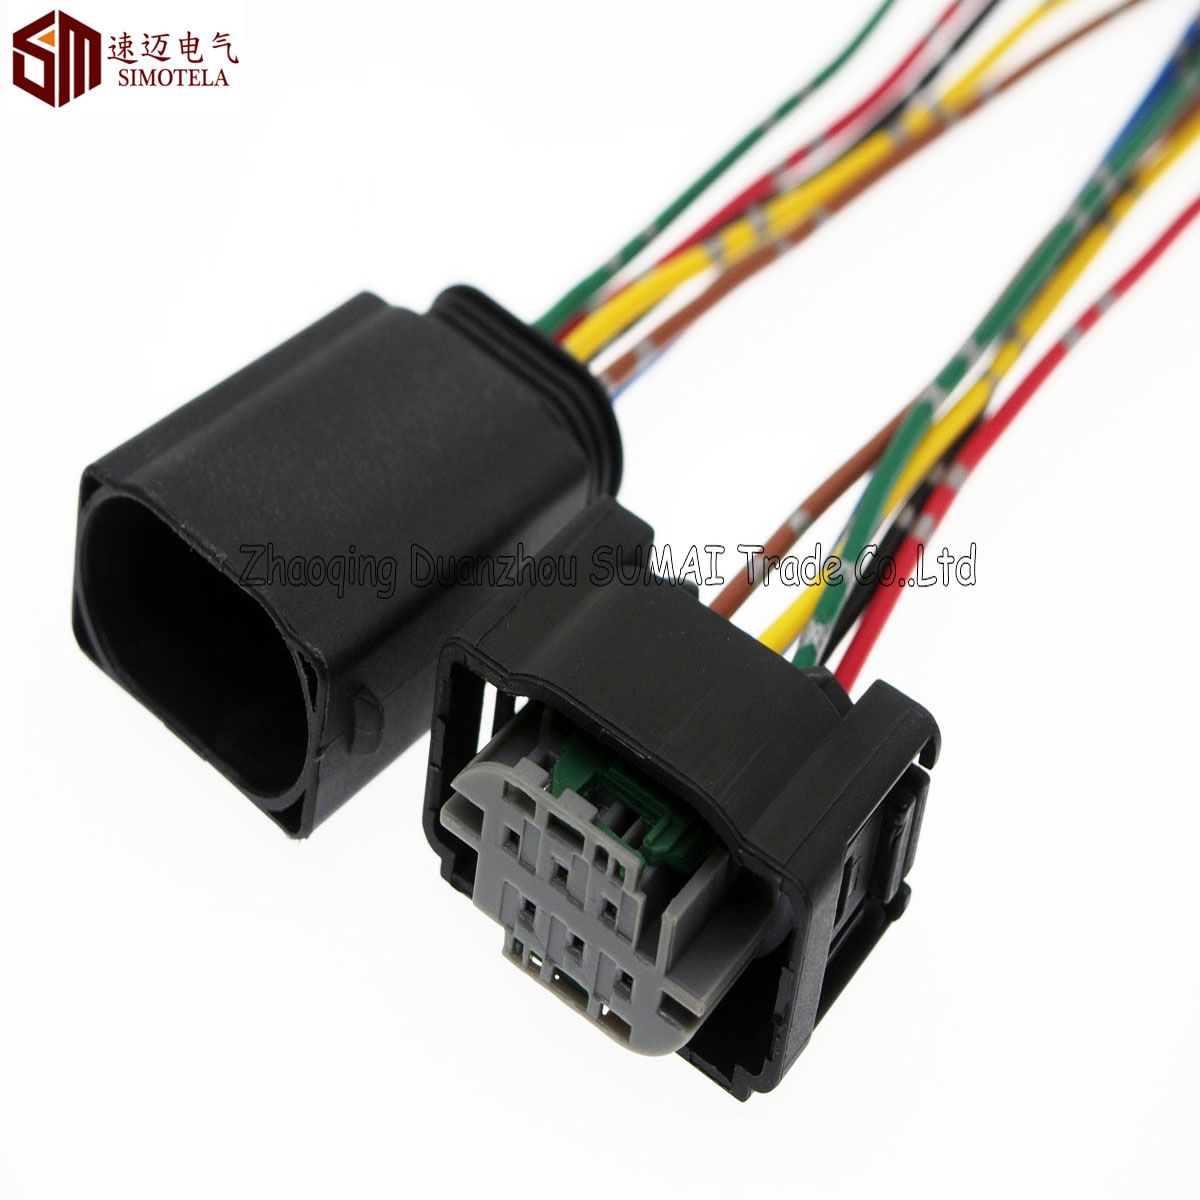 10 Pin 6Pin Switch Cable Connecter For Hyundai Car 